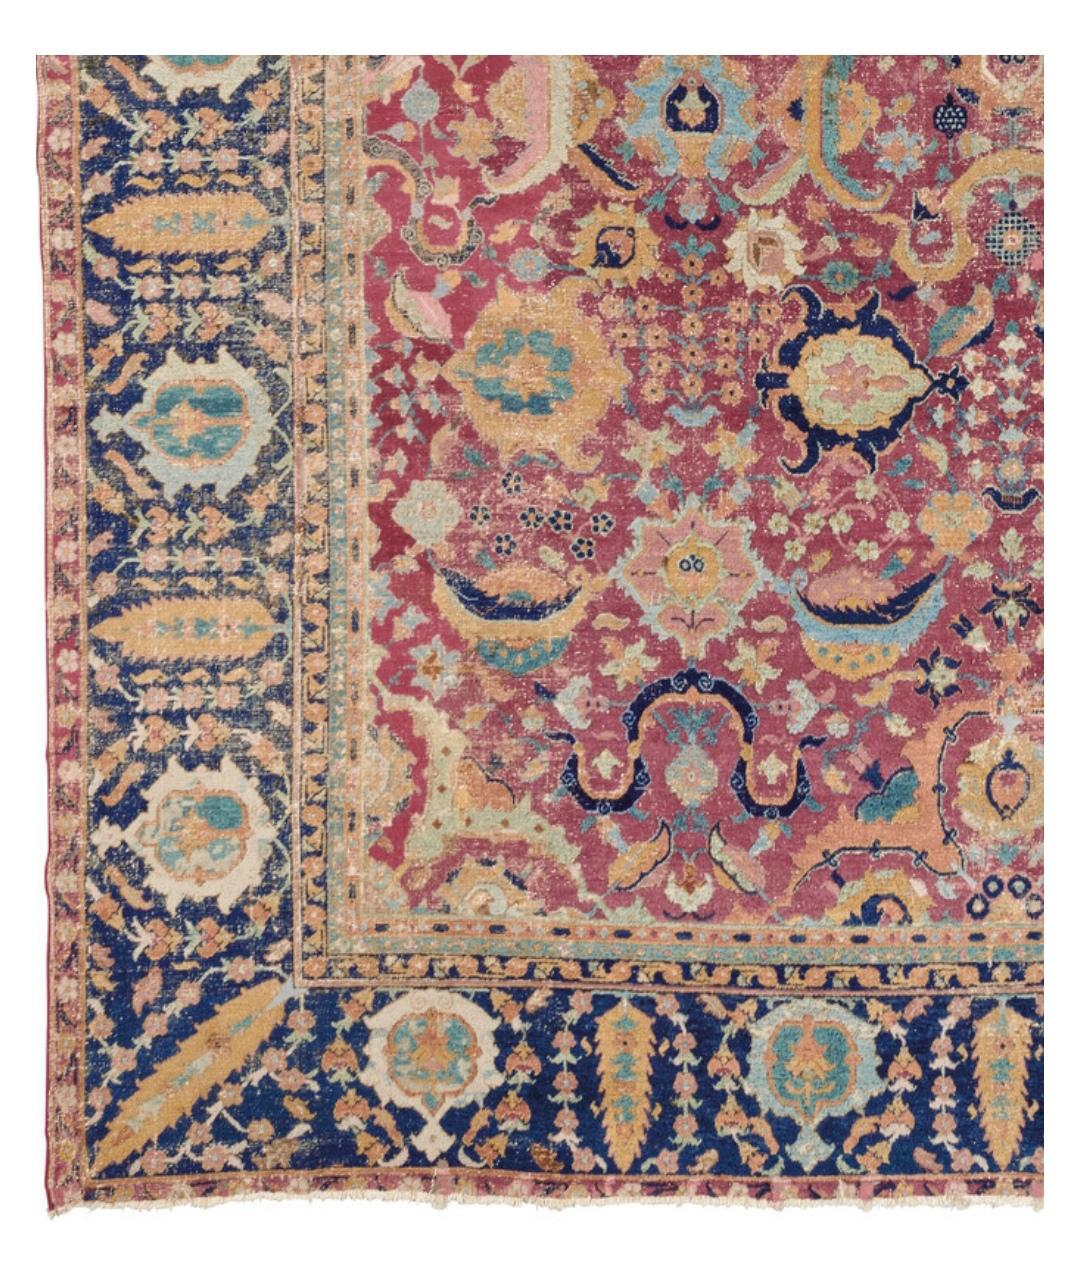 17th C Isfahan carpet
Natural corrosion to crimson and dark brown, with associated extensive repiling, localised repairs, selvages rebound.